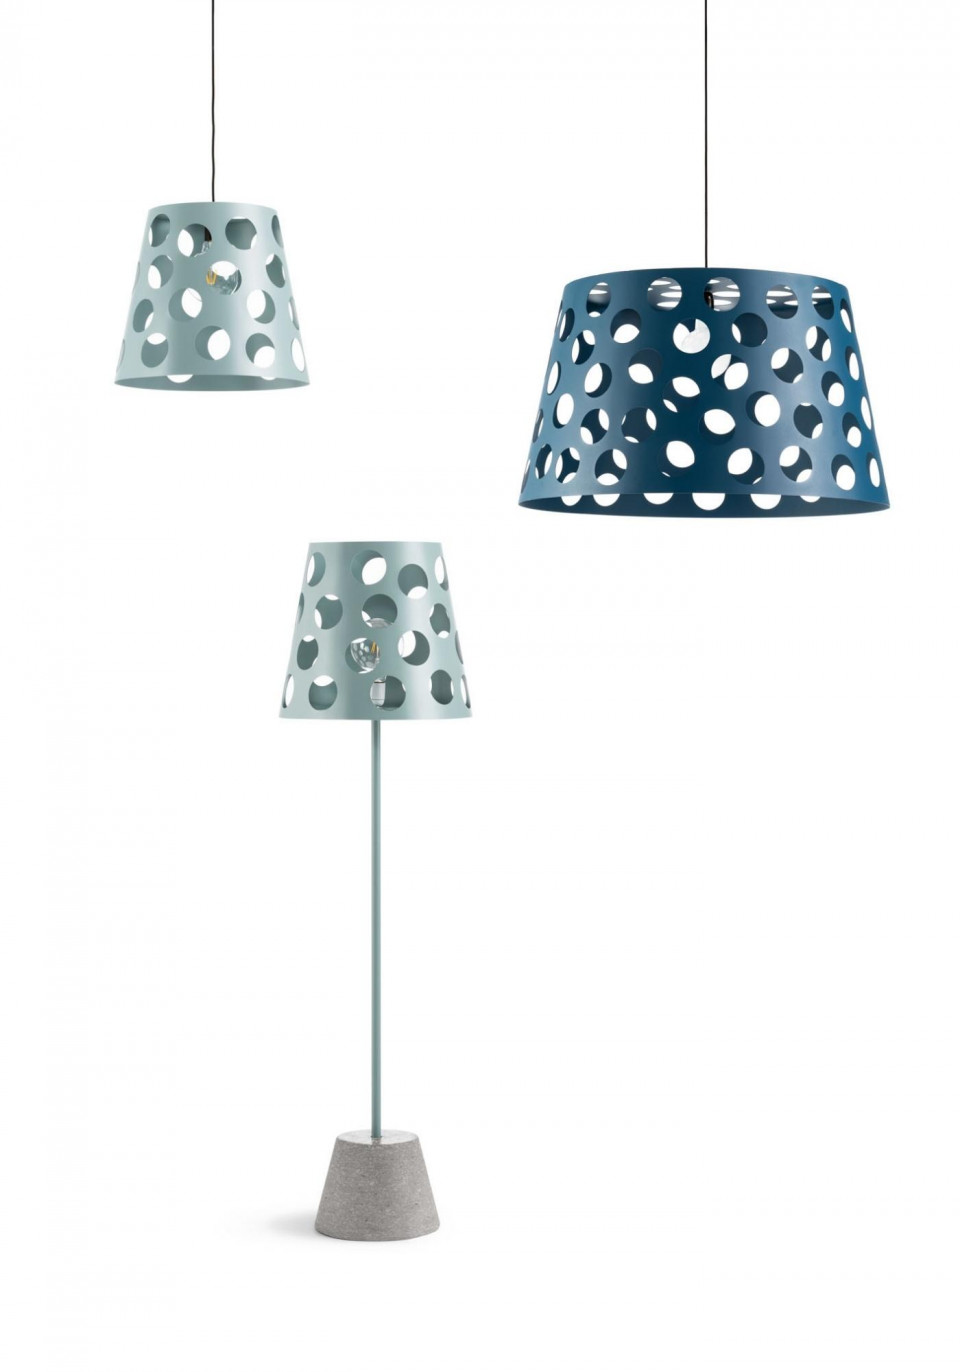 Bolle collection Paola Navone MIDJ